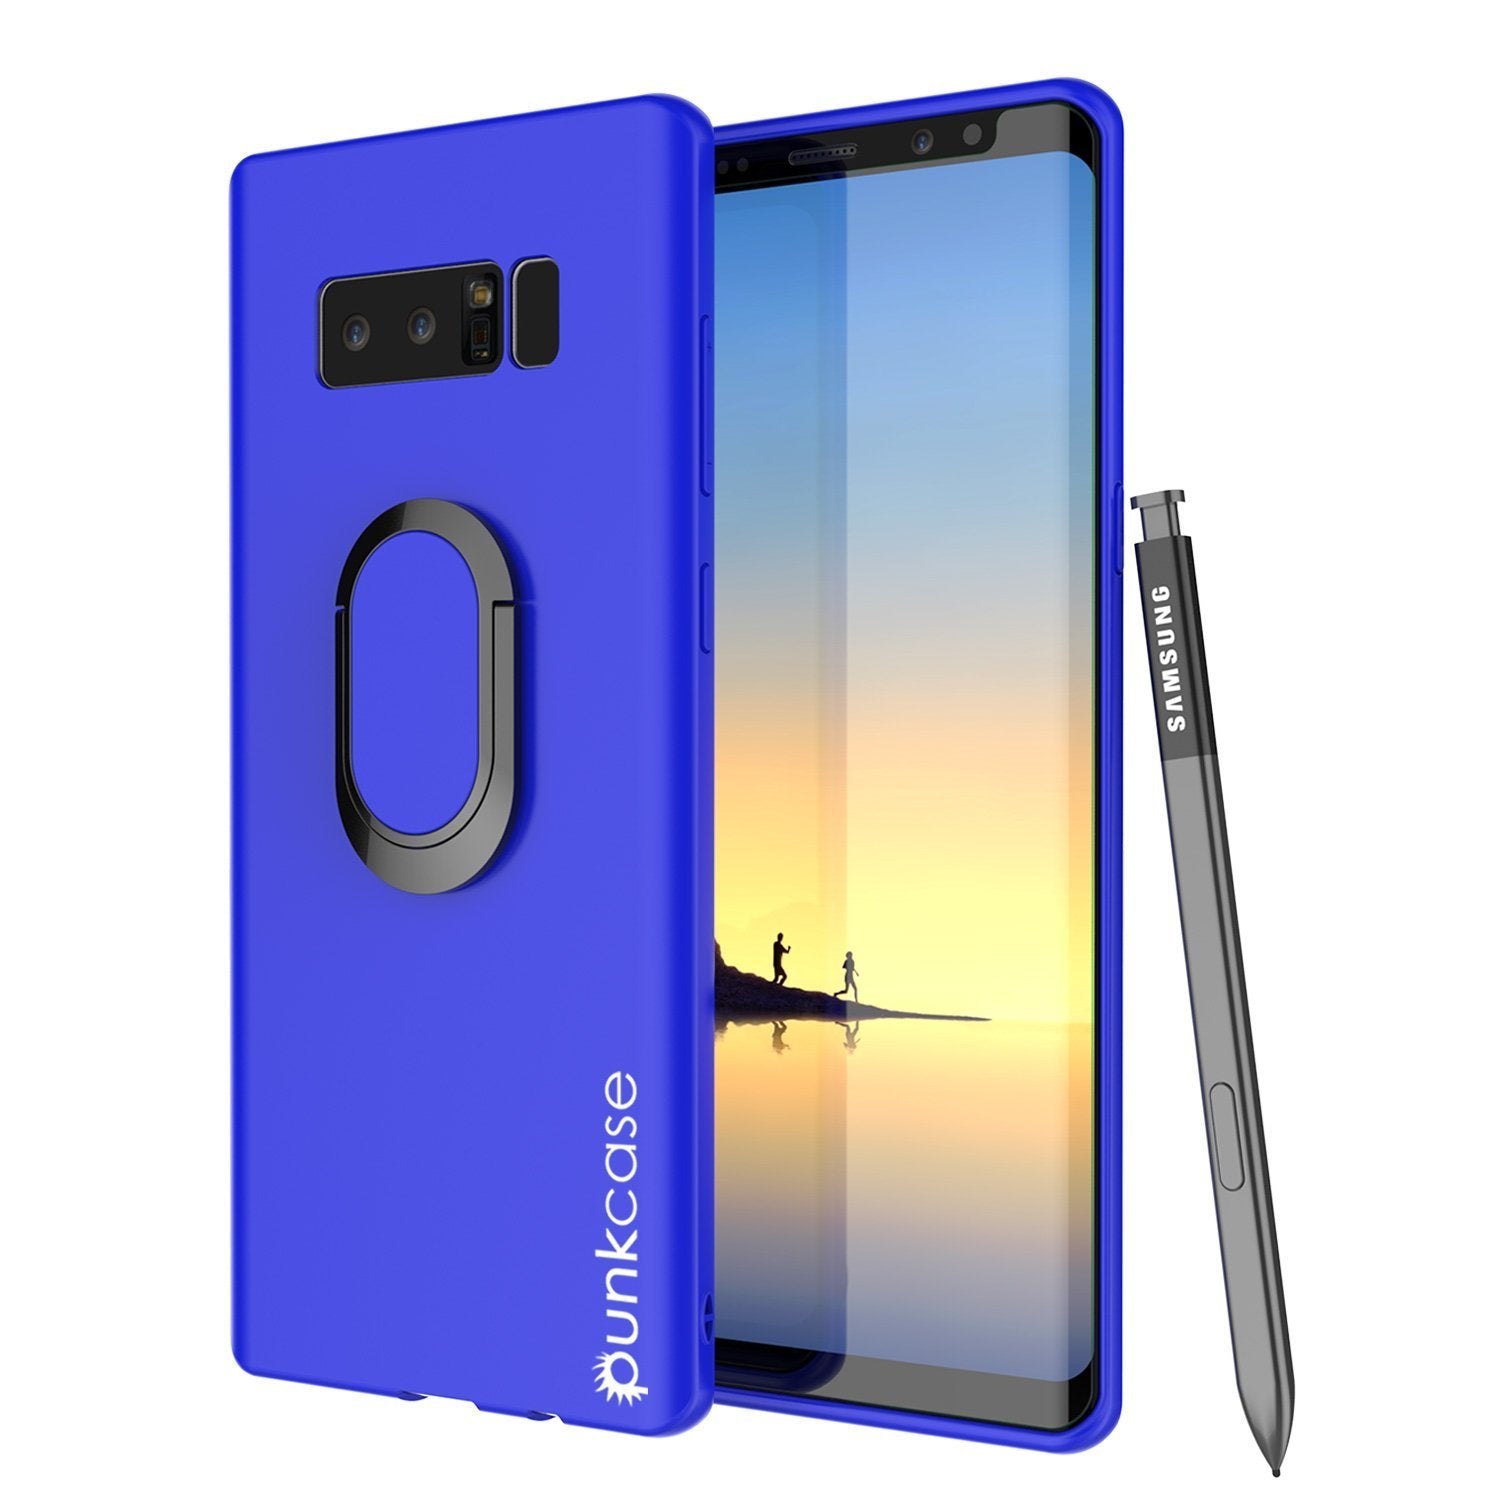 GGalaxy Note 8 case Magnetix Protective TPU Cover W/ Kickstand, Blue